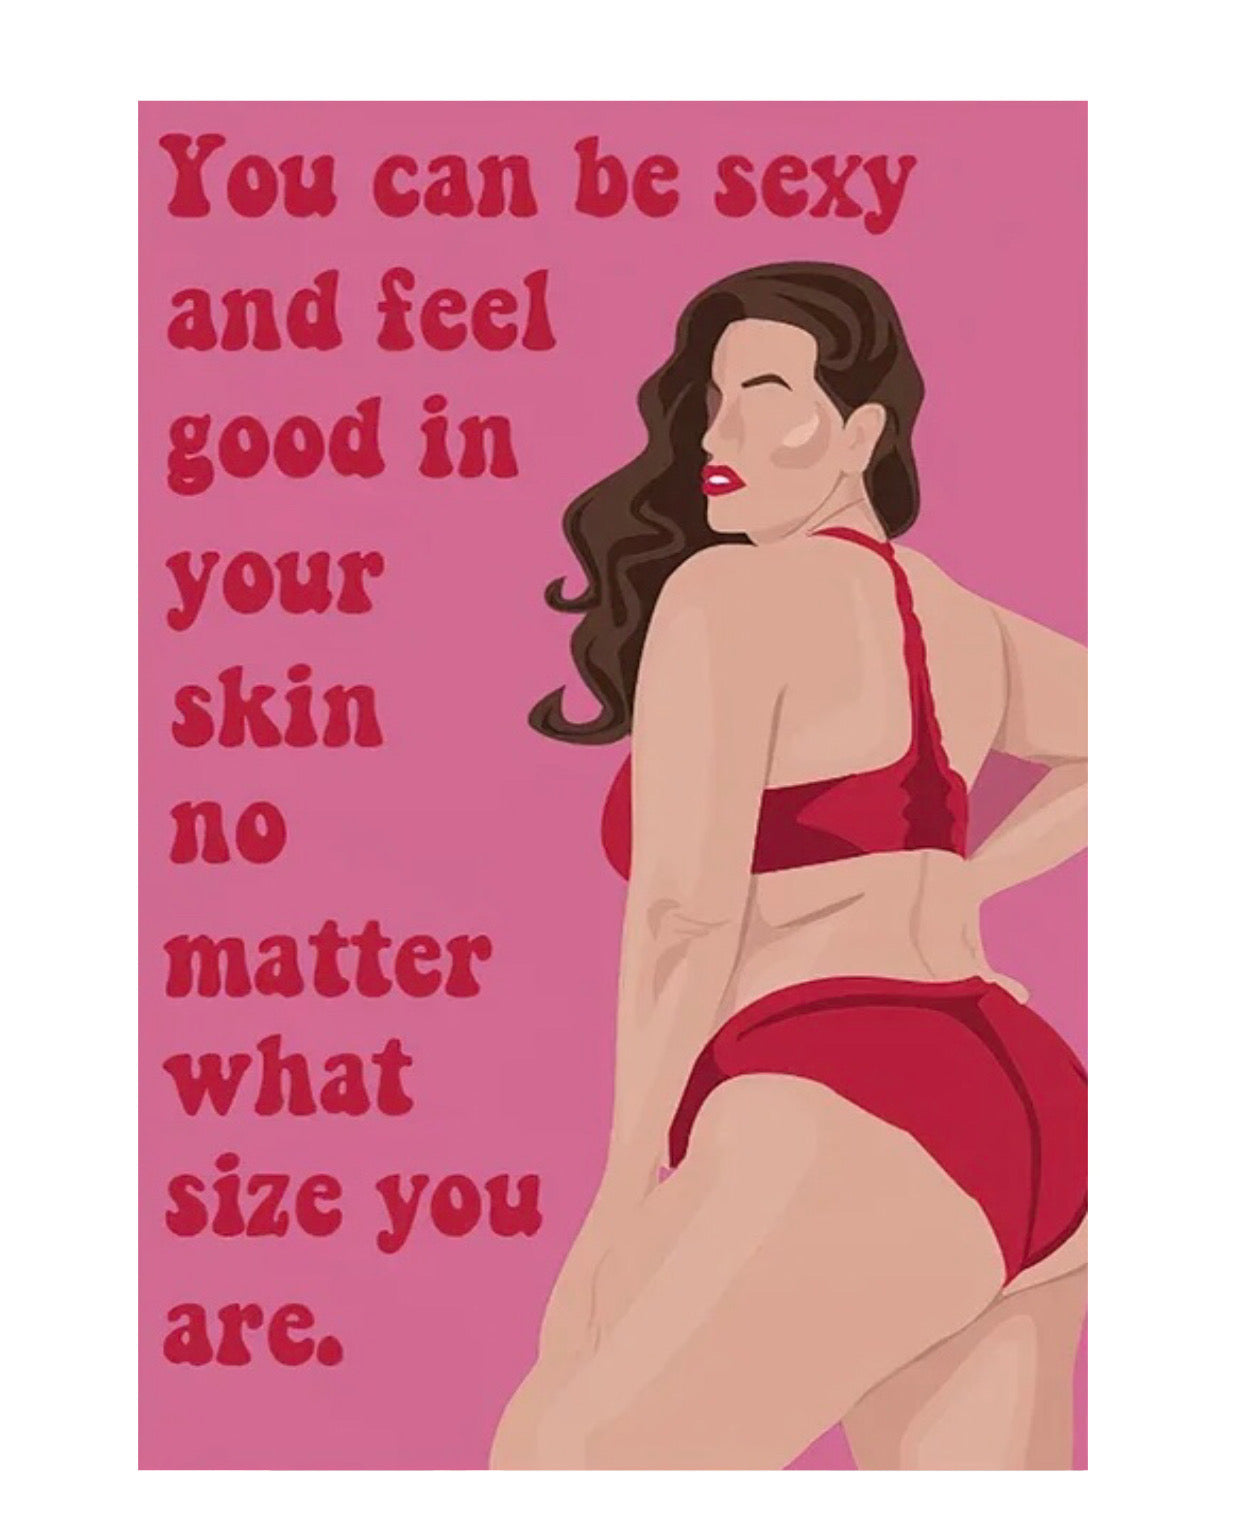 " you can be sexy and feel good in your skin no matter what size you are" poster